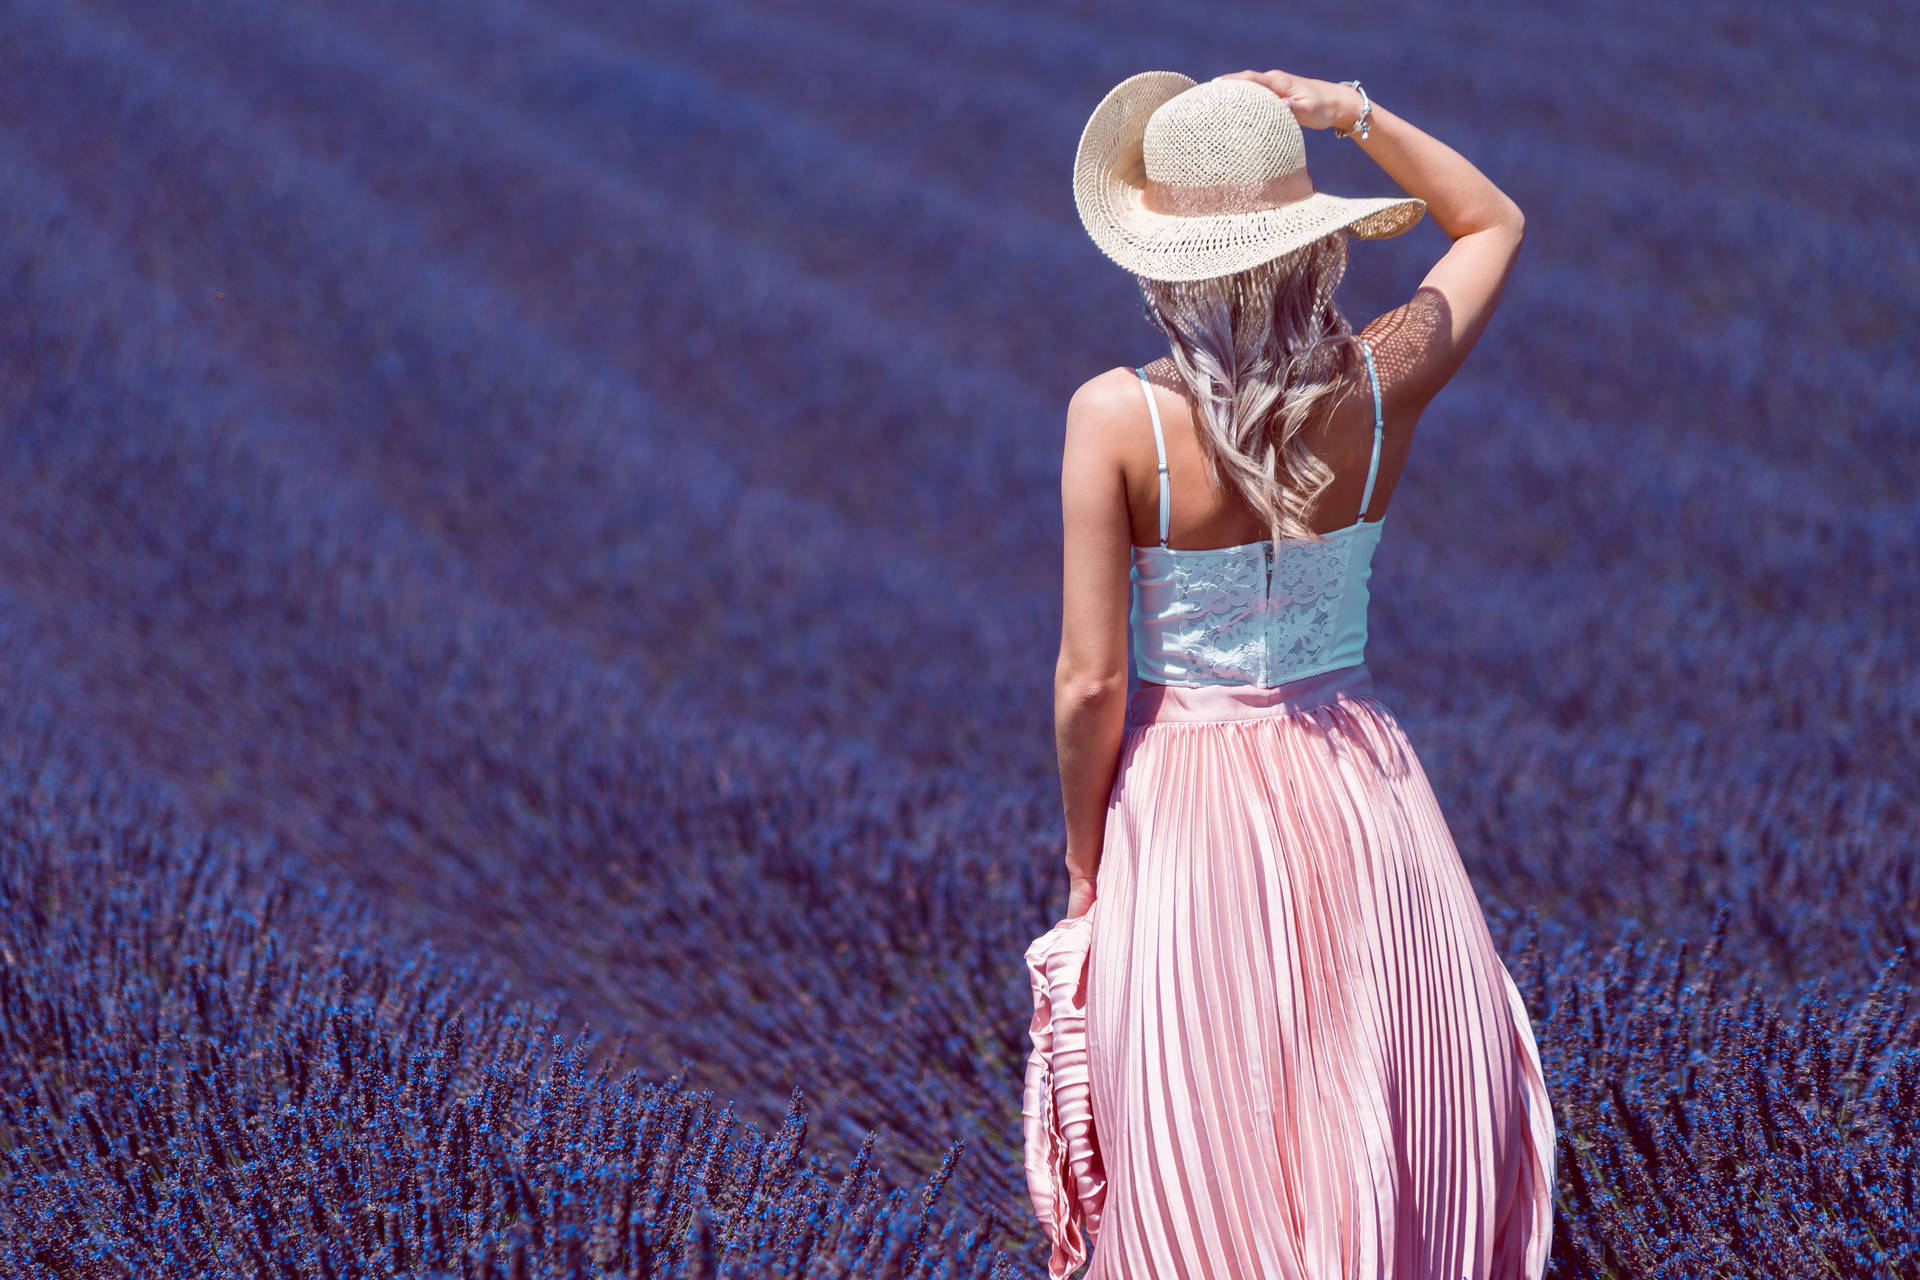 Lavender Aesthetic And Lady In The Field